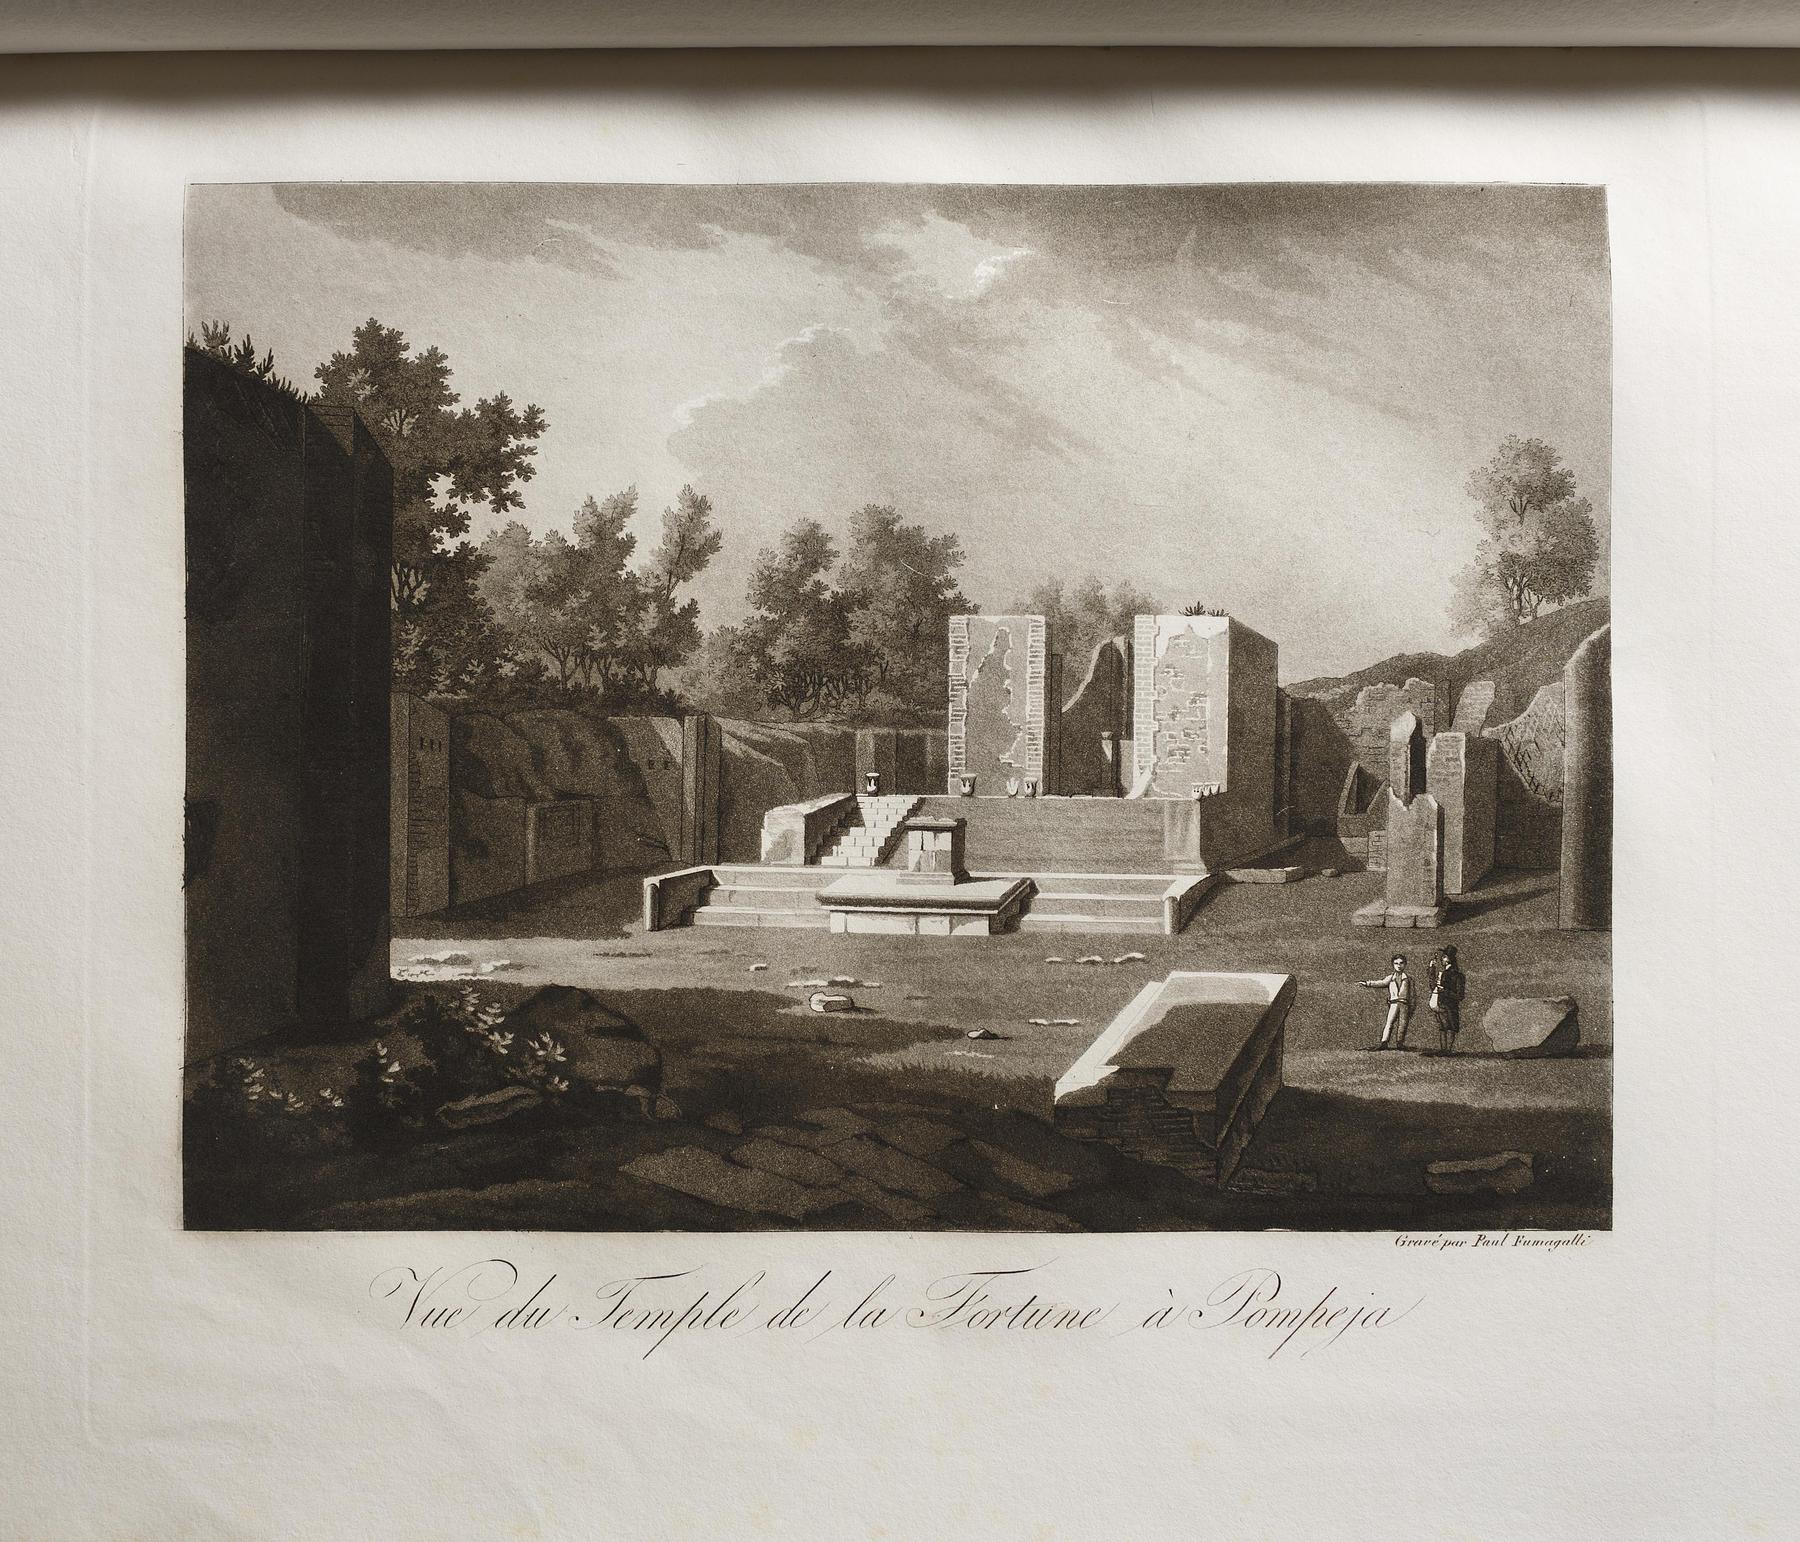 View of the Temple of Fortune in Pompeii, E550,16